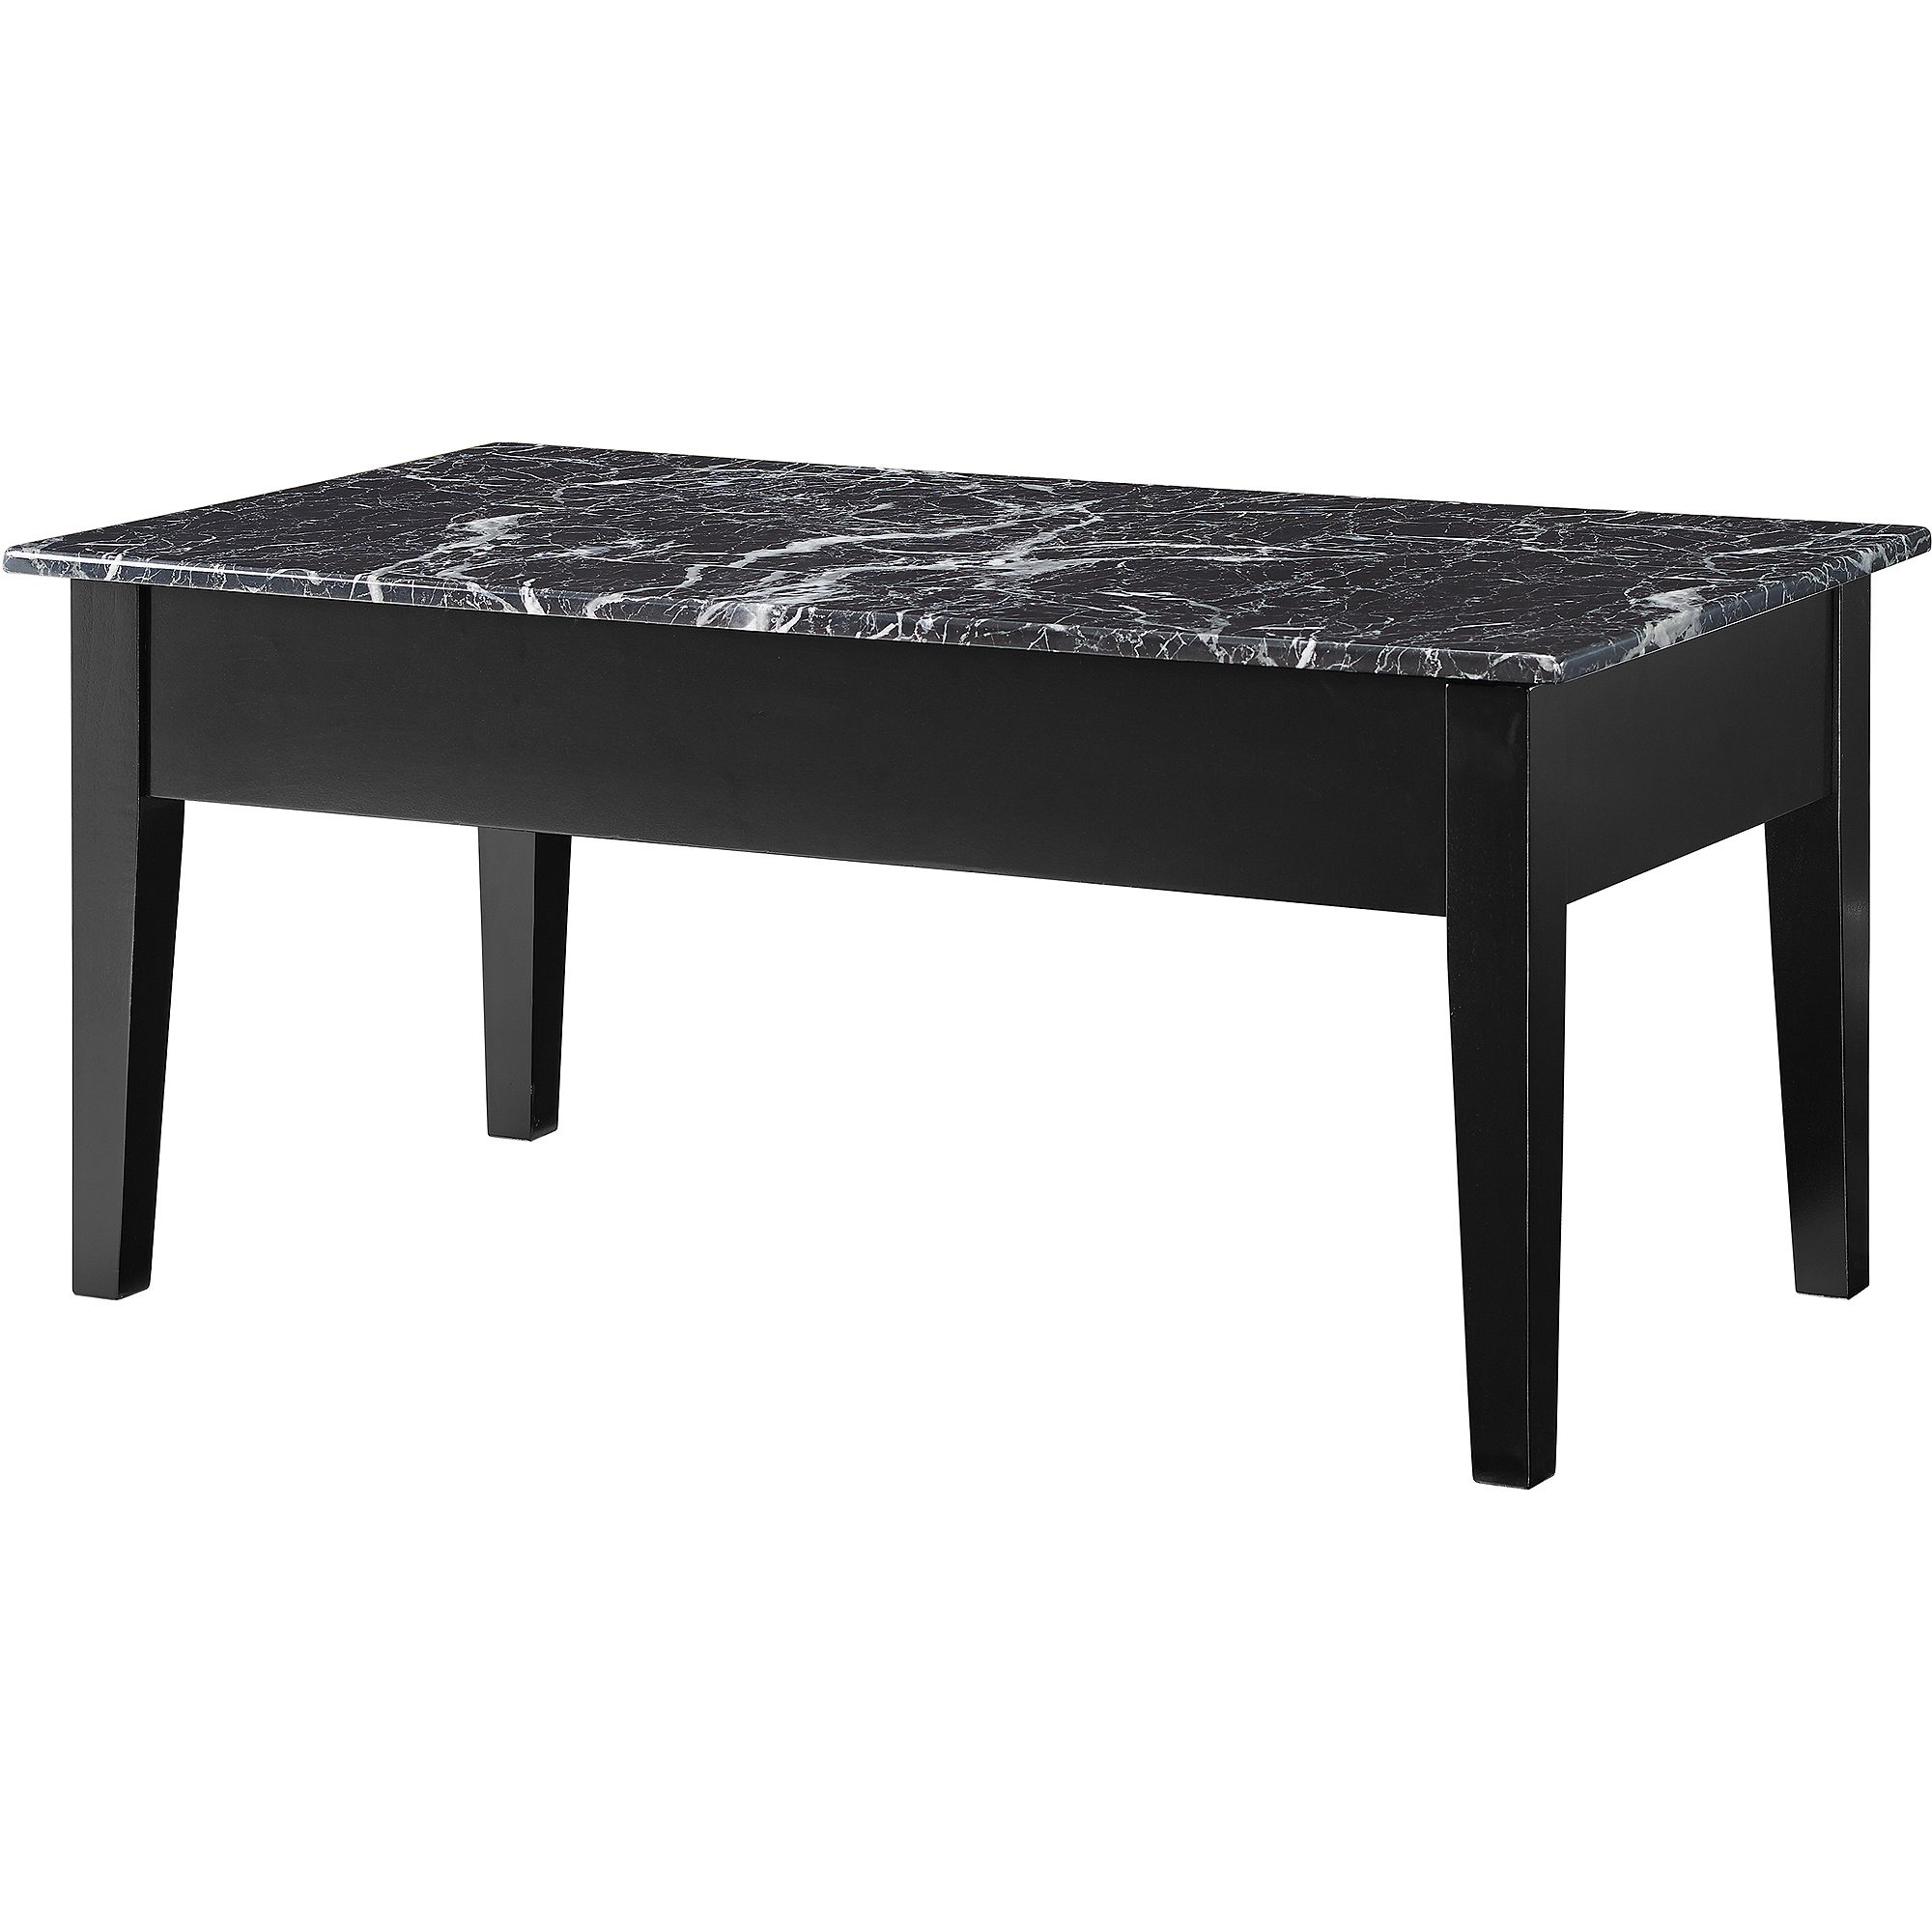 Favorite Dorel Living Faux Marble Lift Top Coffee Table – Walmart Within Market Lift Top Cocktail Tables (View 17 of 20)